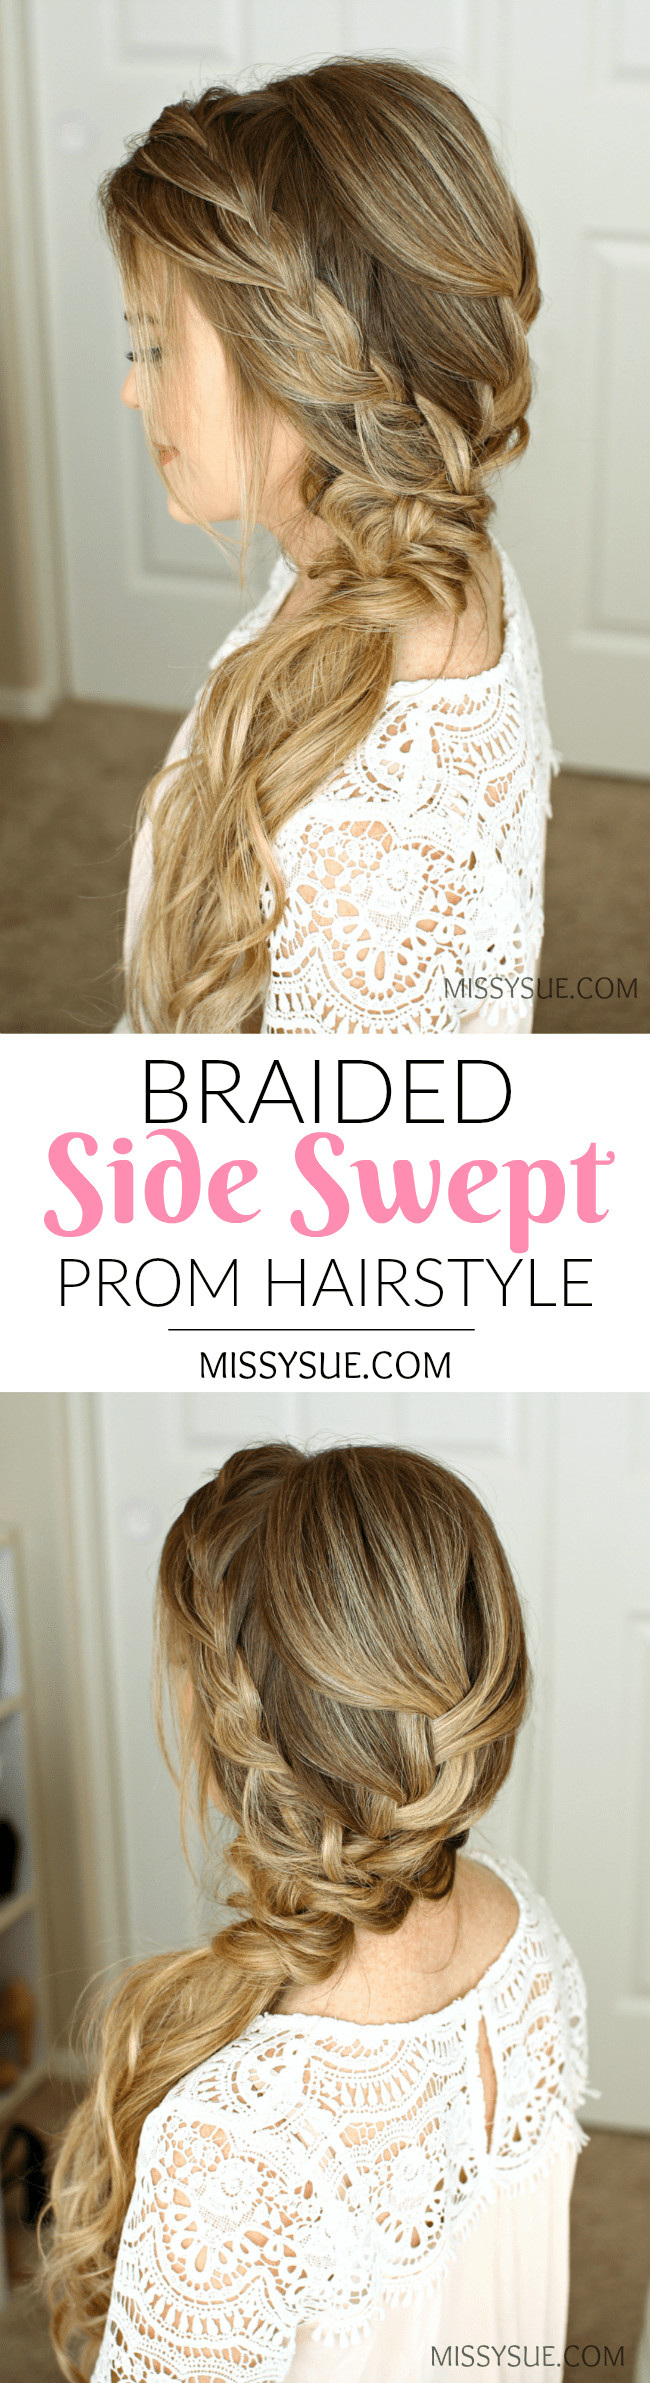 Prom Hairstyle Braid
 Braided Side Swept Prom Hairstyle